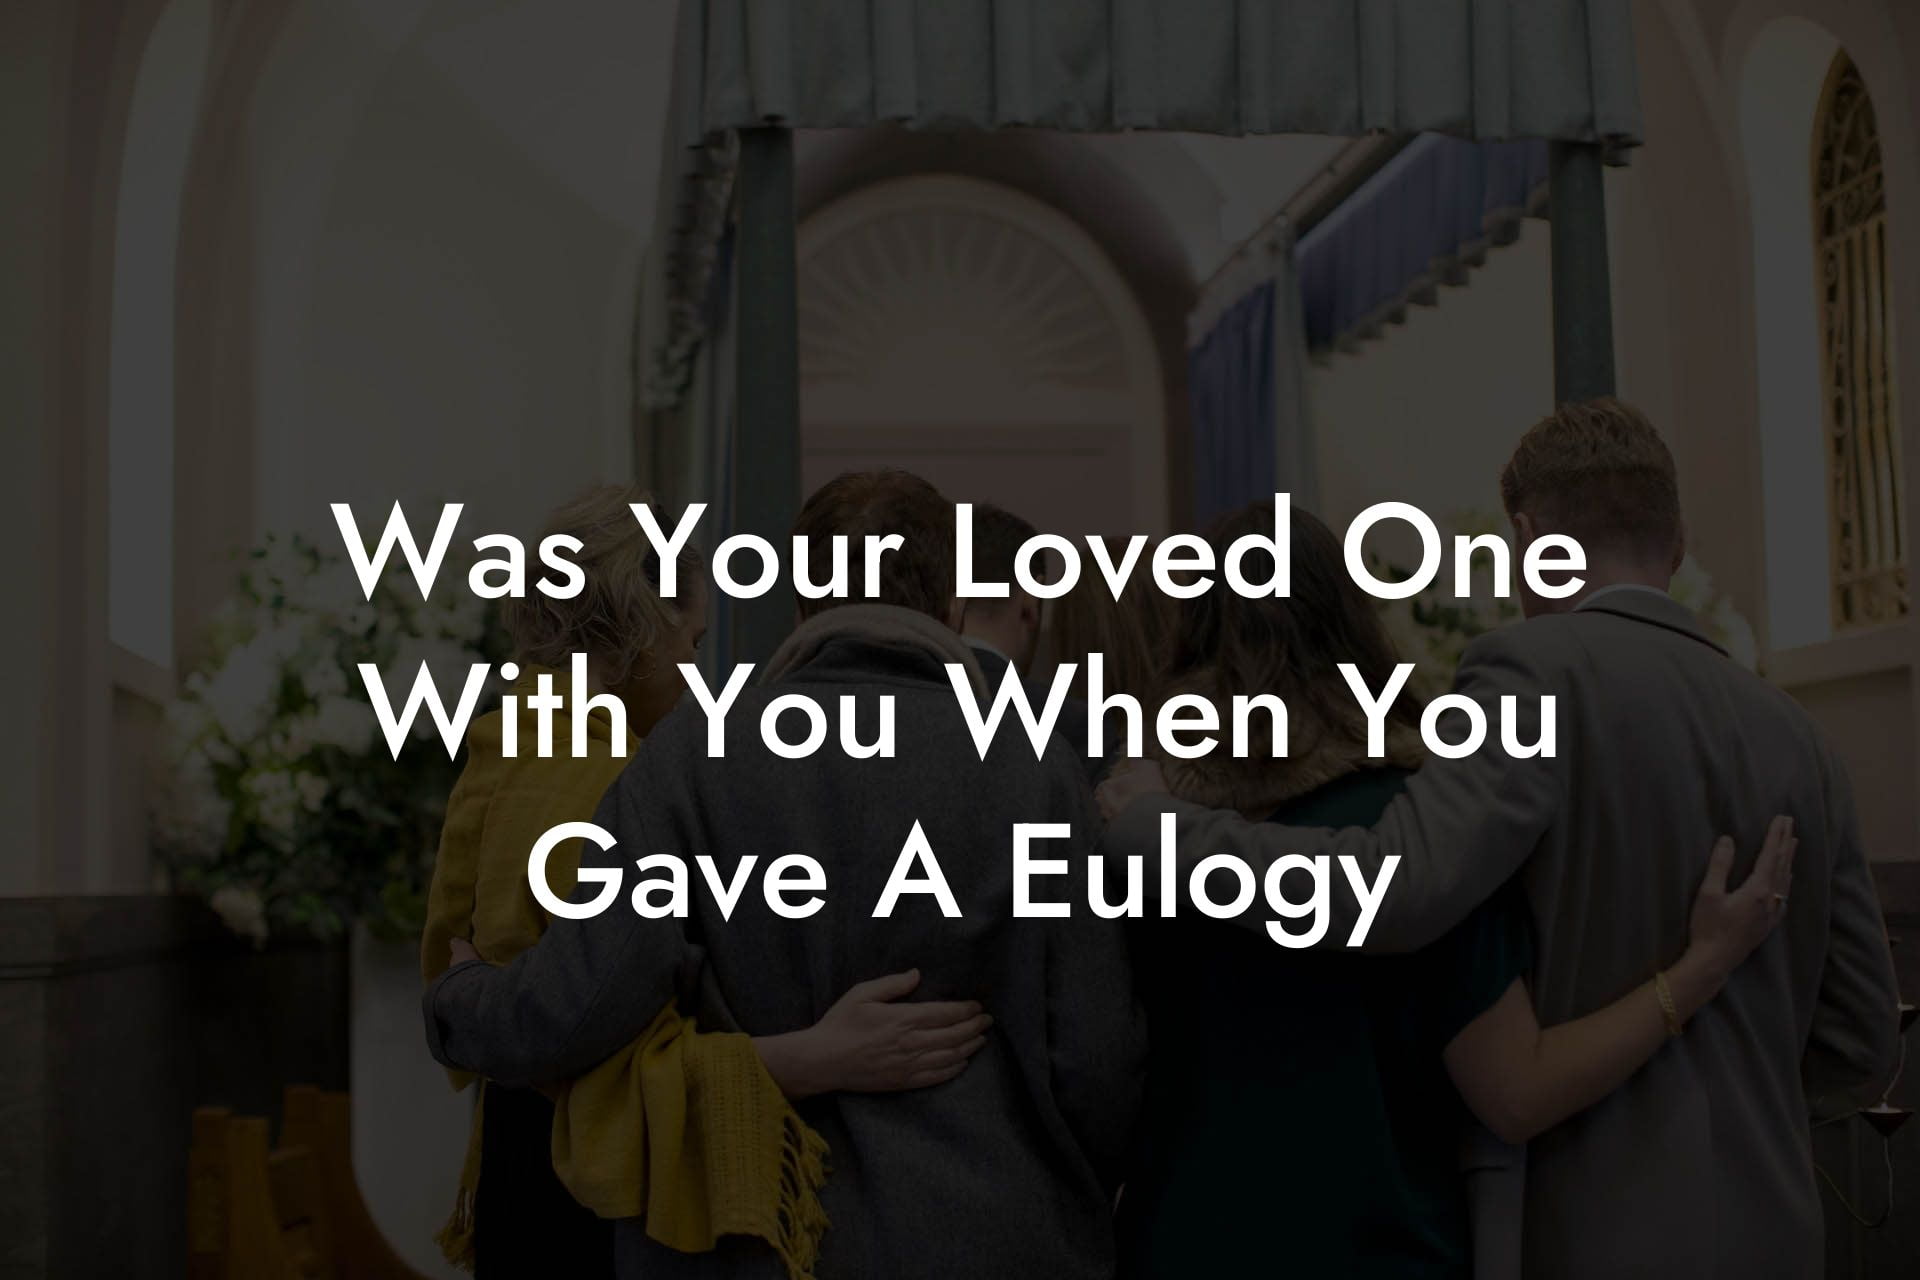 Was Your Loved One With You When You Gave A Eulogy